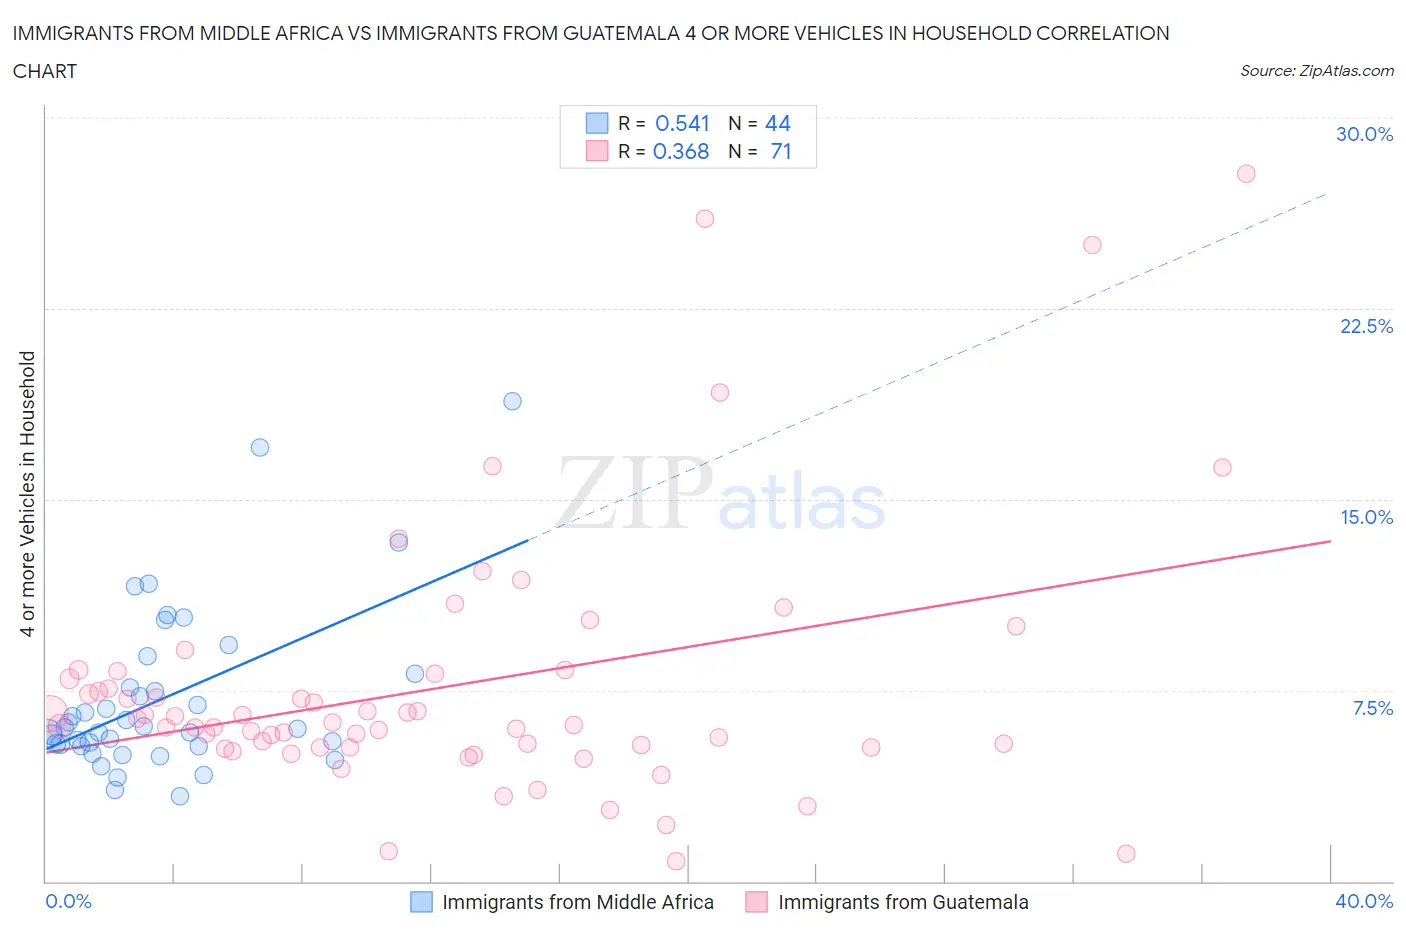 Immigrants from Middle Africa vs Immigrants from Guatemala 4 or more Vehicles in Household